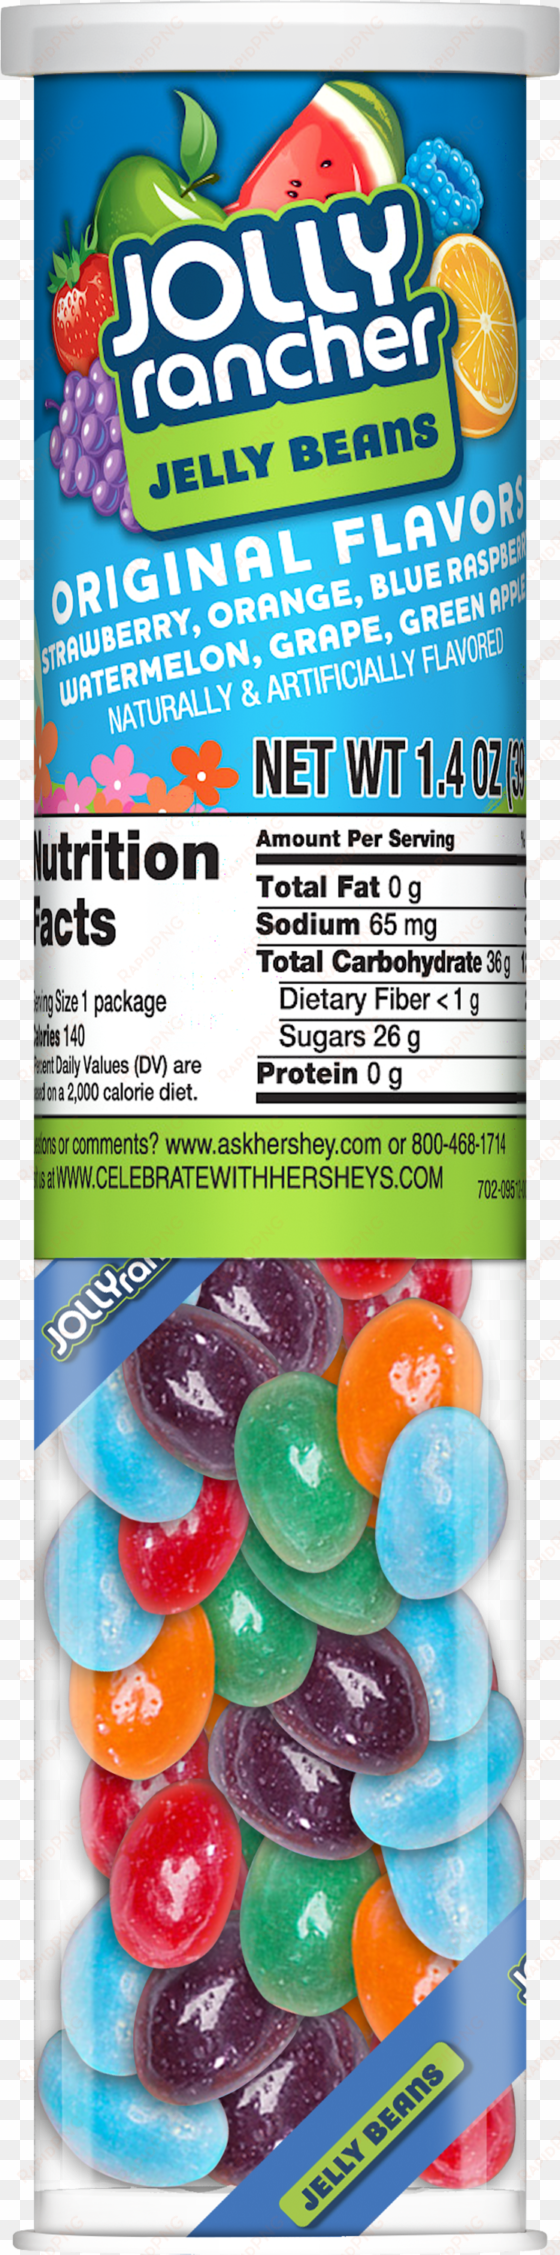 jolly rancher jelly beans - 14 oz packet